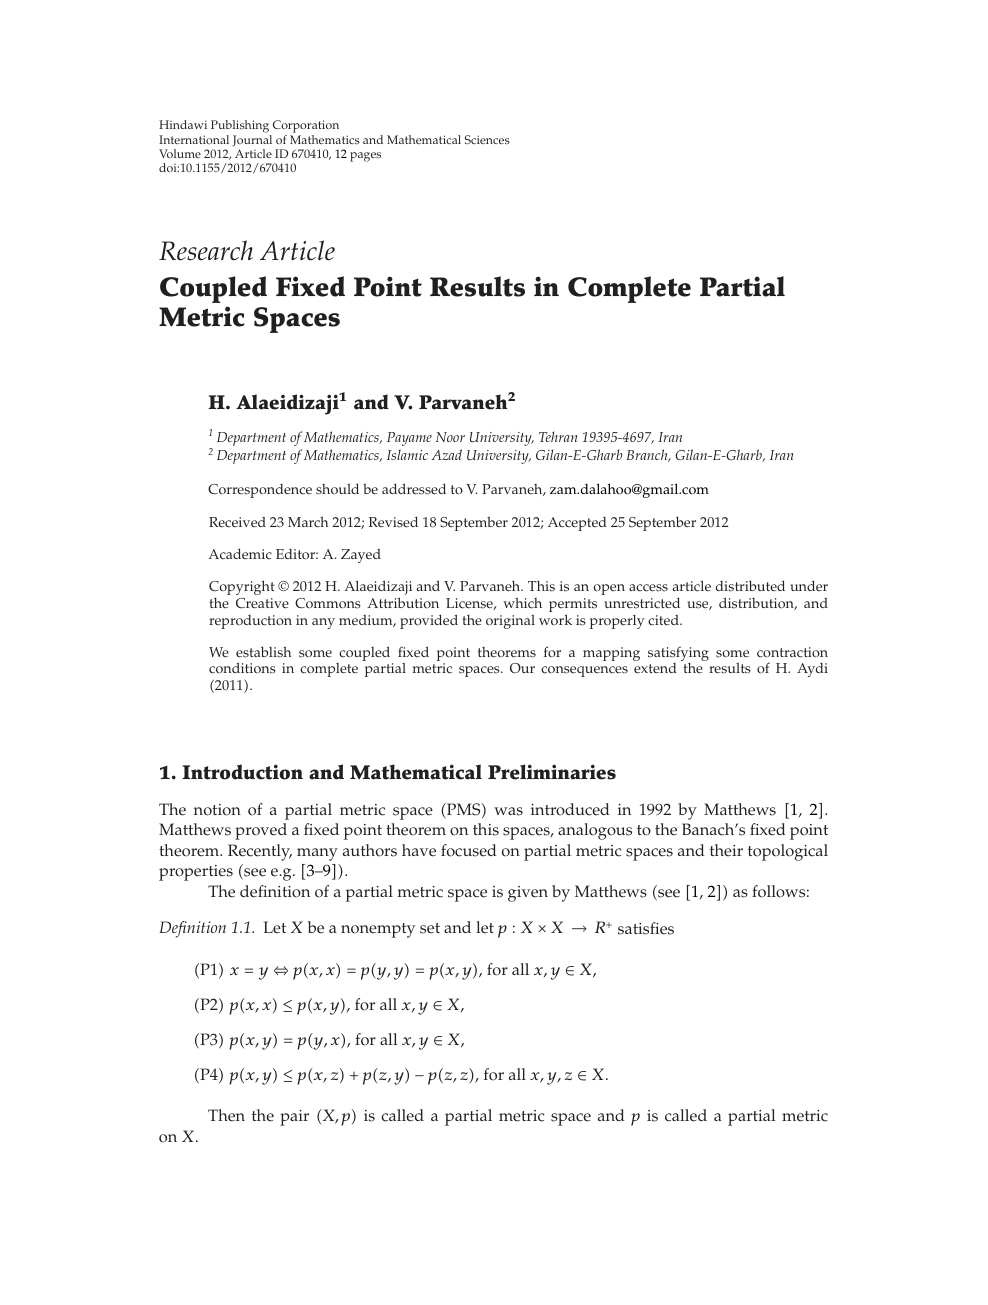 Coupled Fixed Point Results In Complete Partial Metric Spaces Topic Of Research Paper In Mathematics Download Scholarly Article Pdf And Read For Free On Cyberleninka Open Science Hub